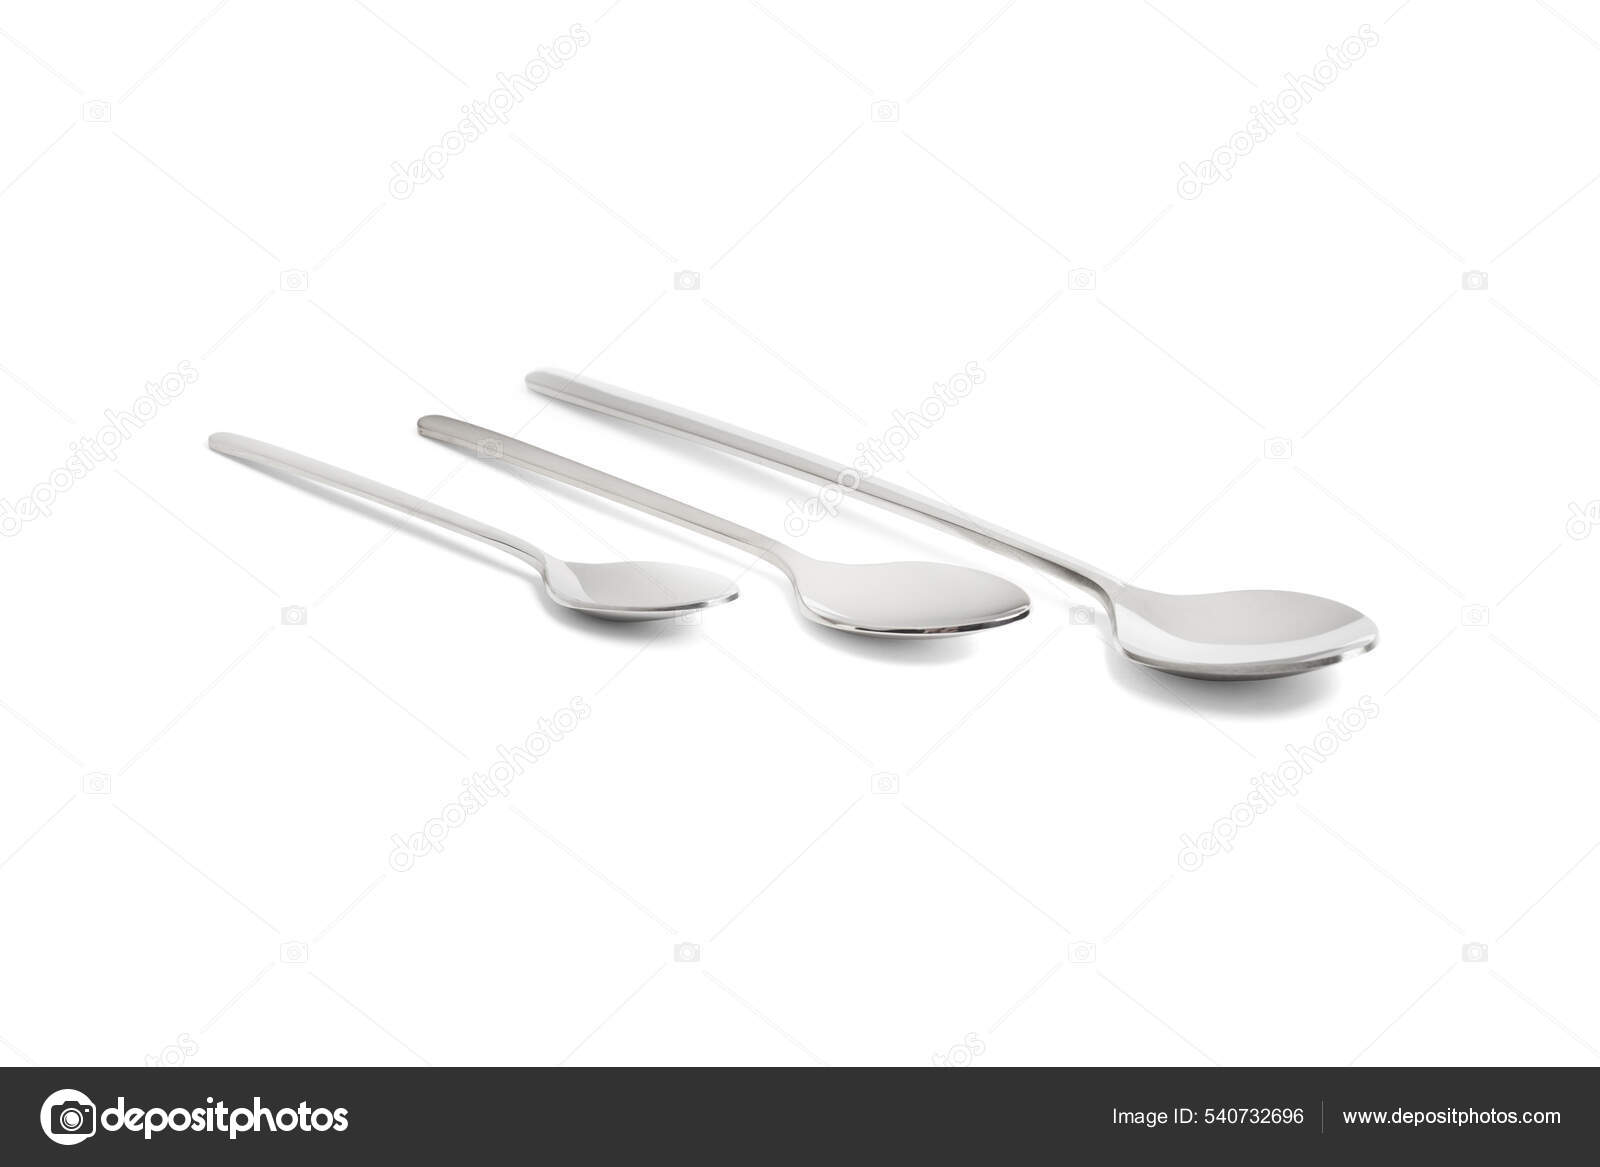 Clean shiny metal spoon isolated on white. Stainless steel small